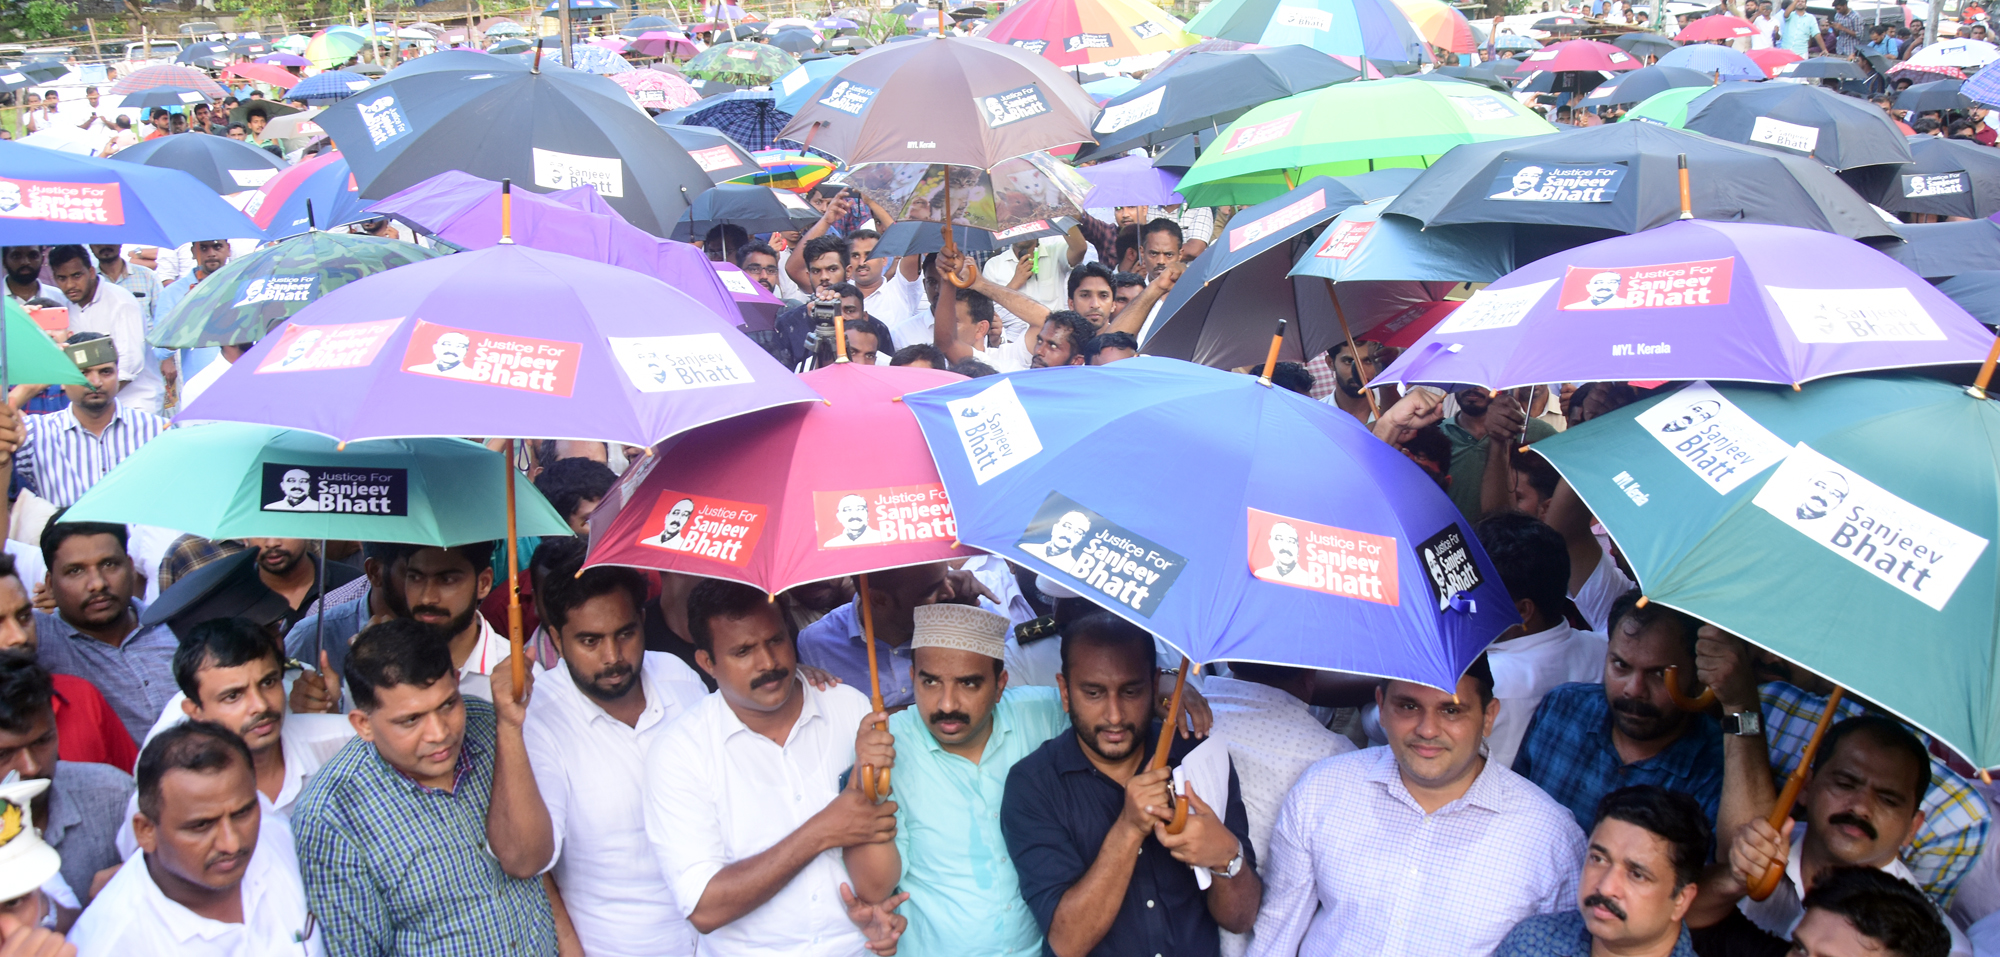 http://malayalamnewsdaily.com/sites/default/files/2019/06/28/p5cltyleagueumarch28.jpg